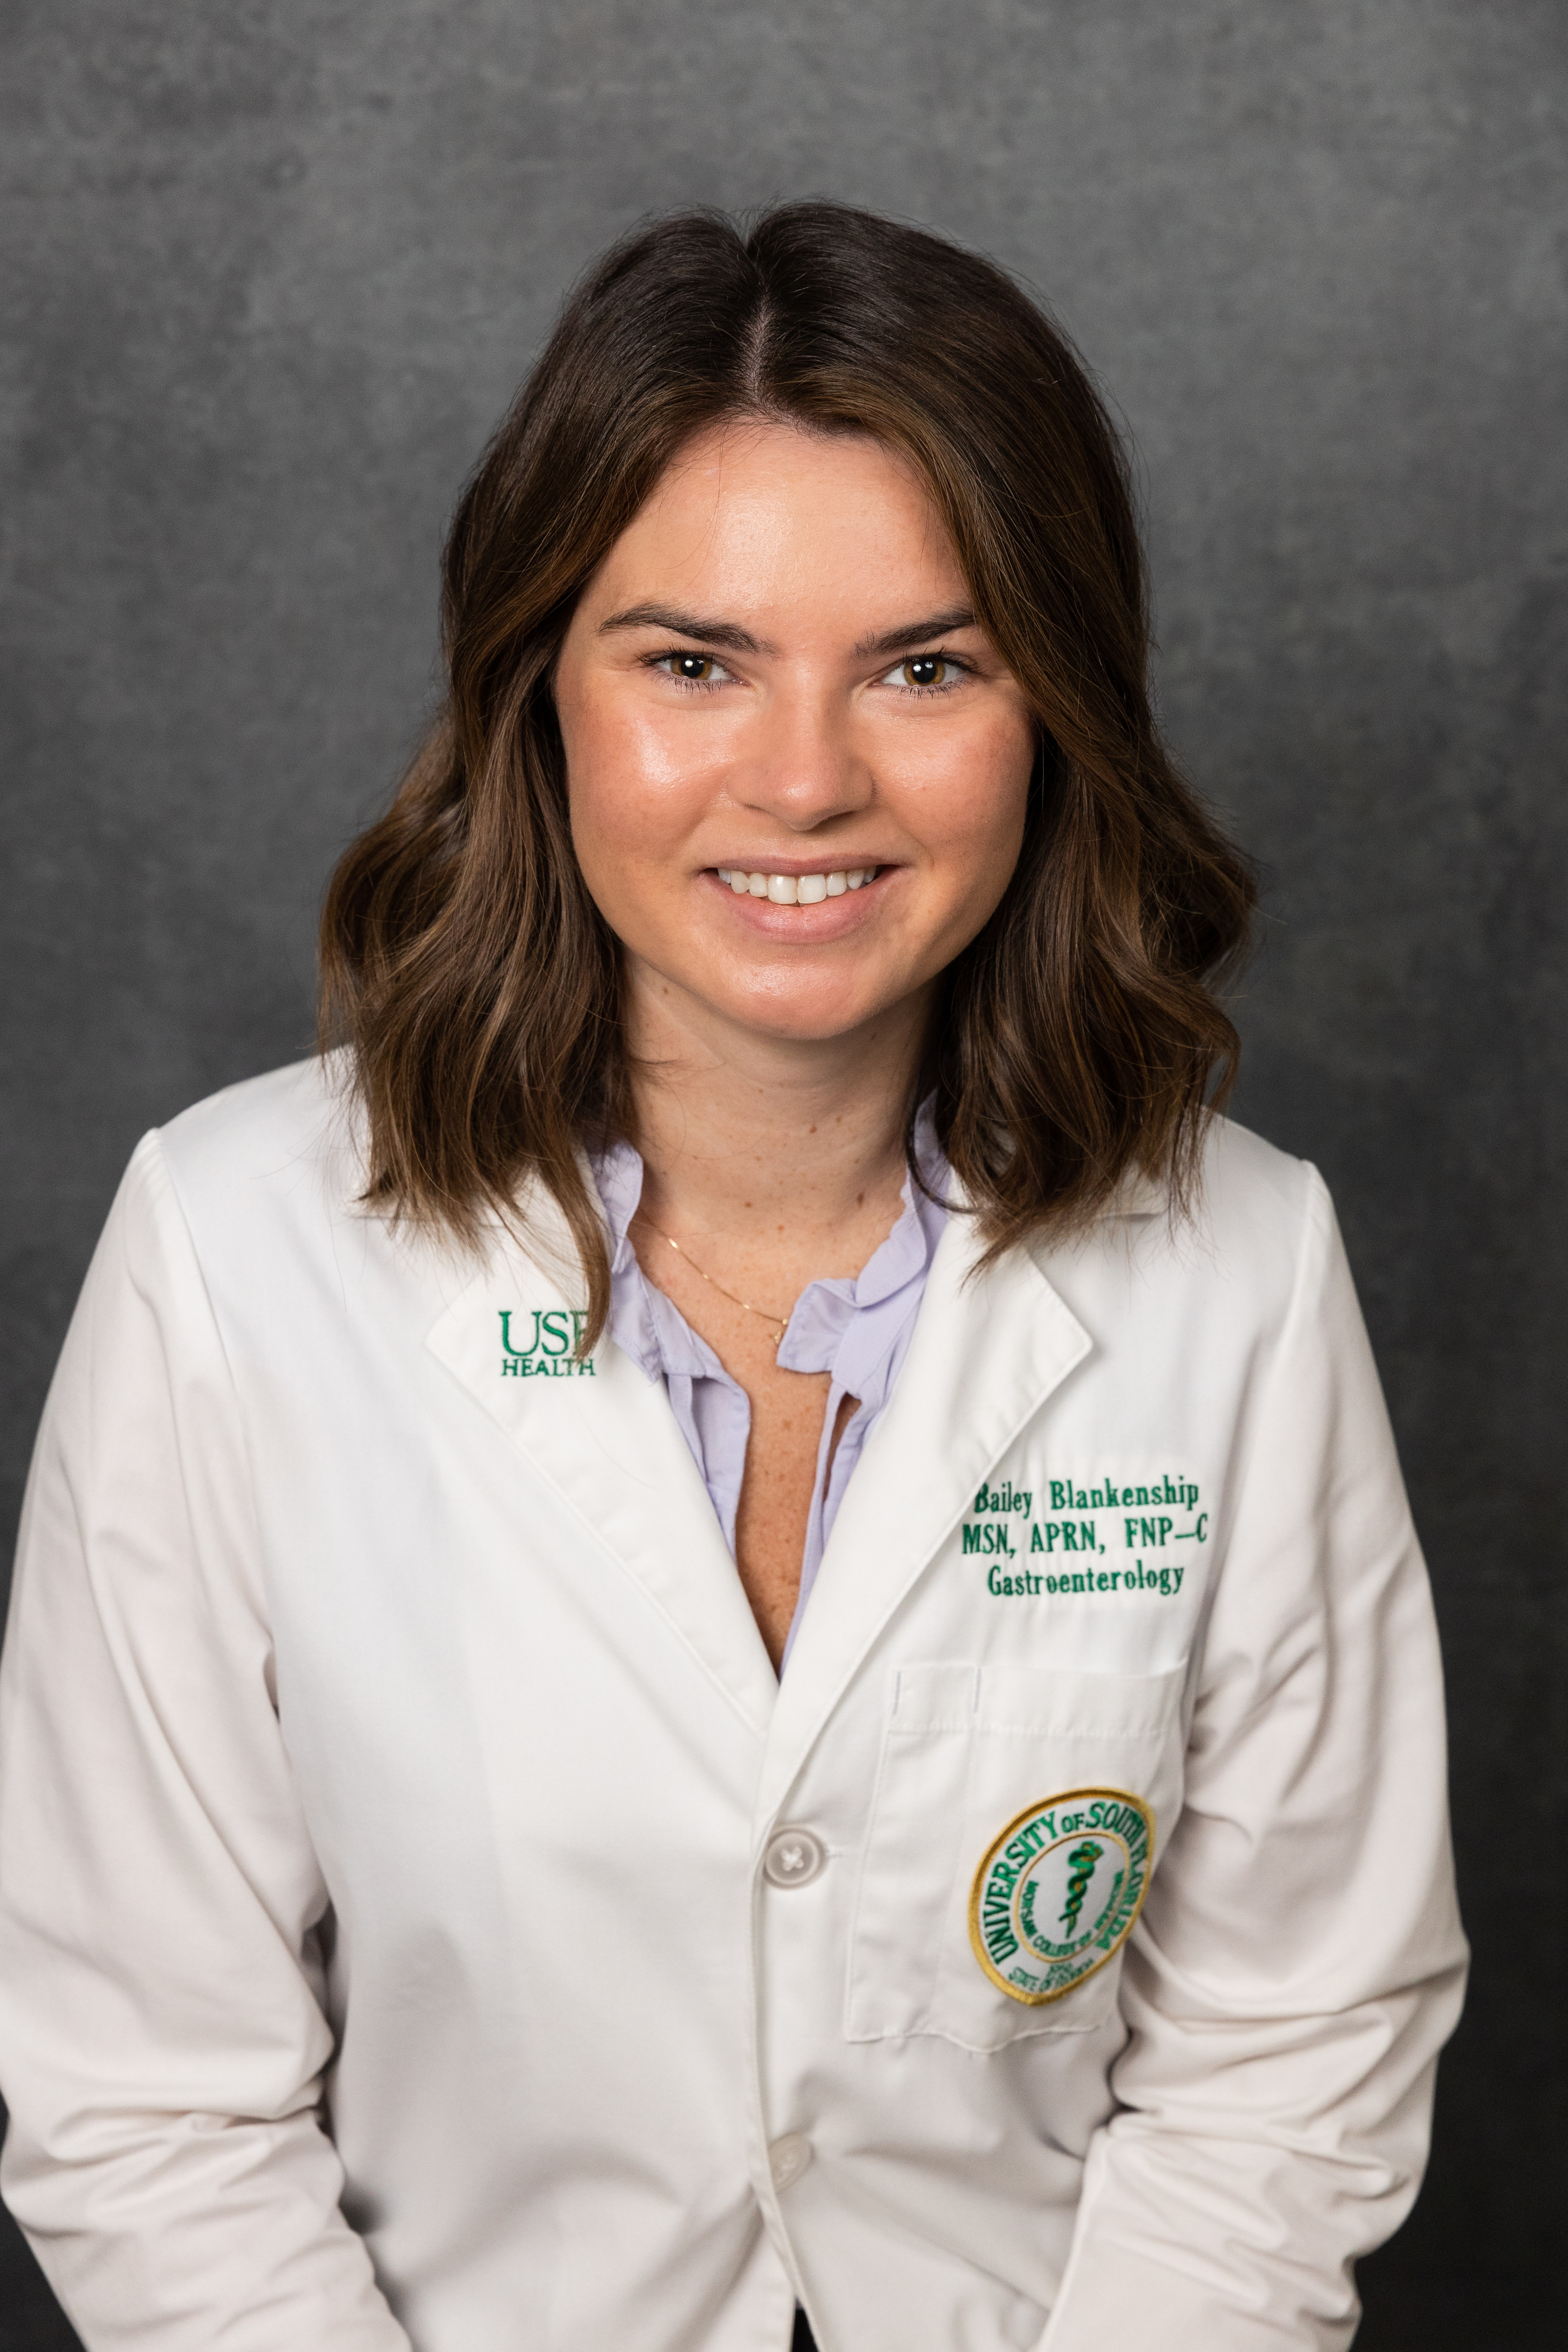 Headshot of Bailey Blankenship, MSN, APRN, FNP-C in whitecoat with USF Health Department of Internal Medicine Division of Gastroenterology